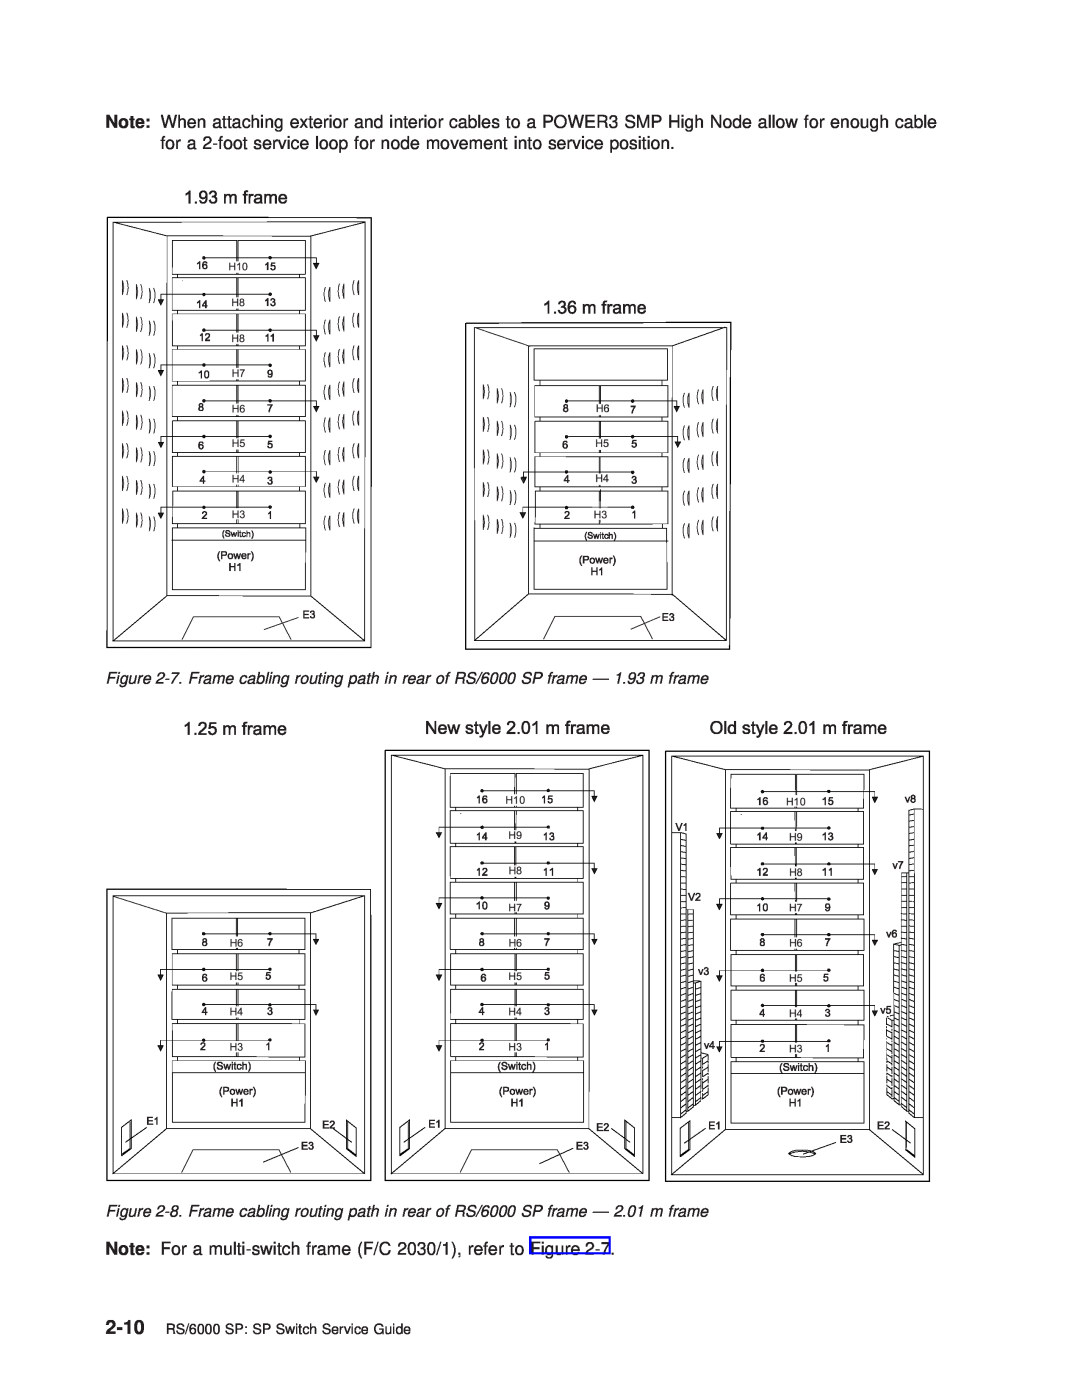 IBM RS/6000 SP manual Note For a multi-switch frame F/C 2030/1, refer to Figure 